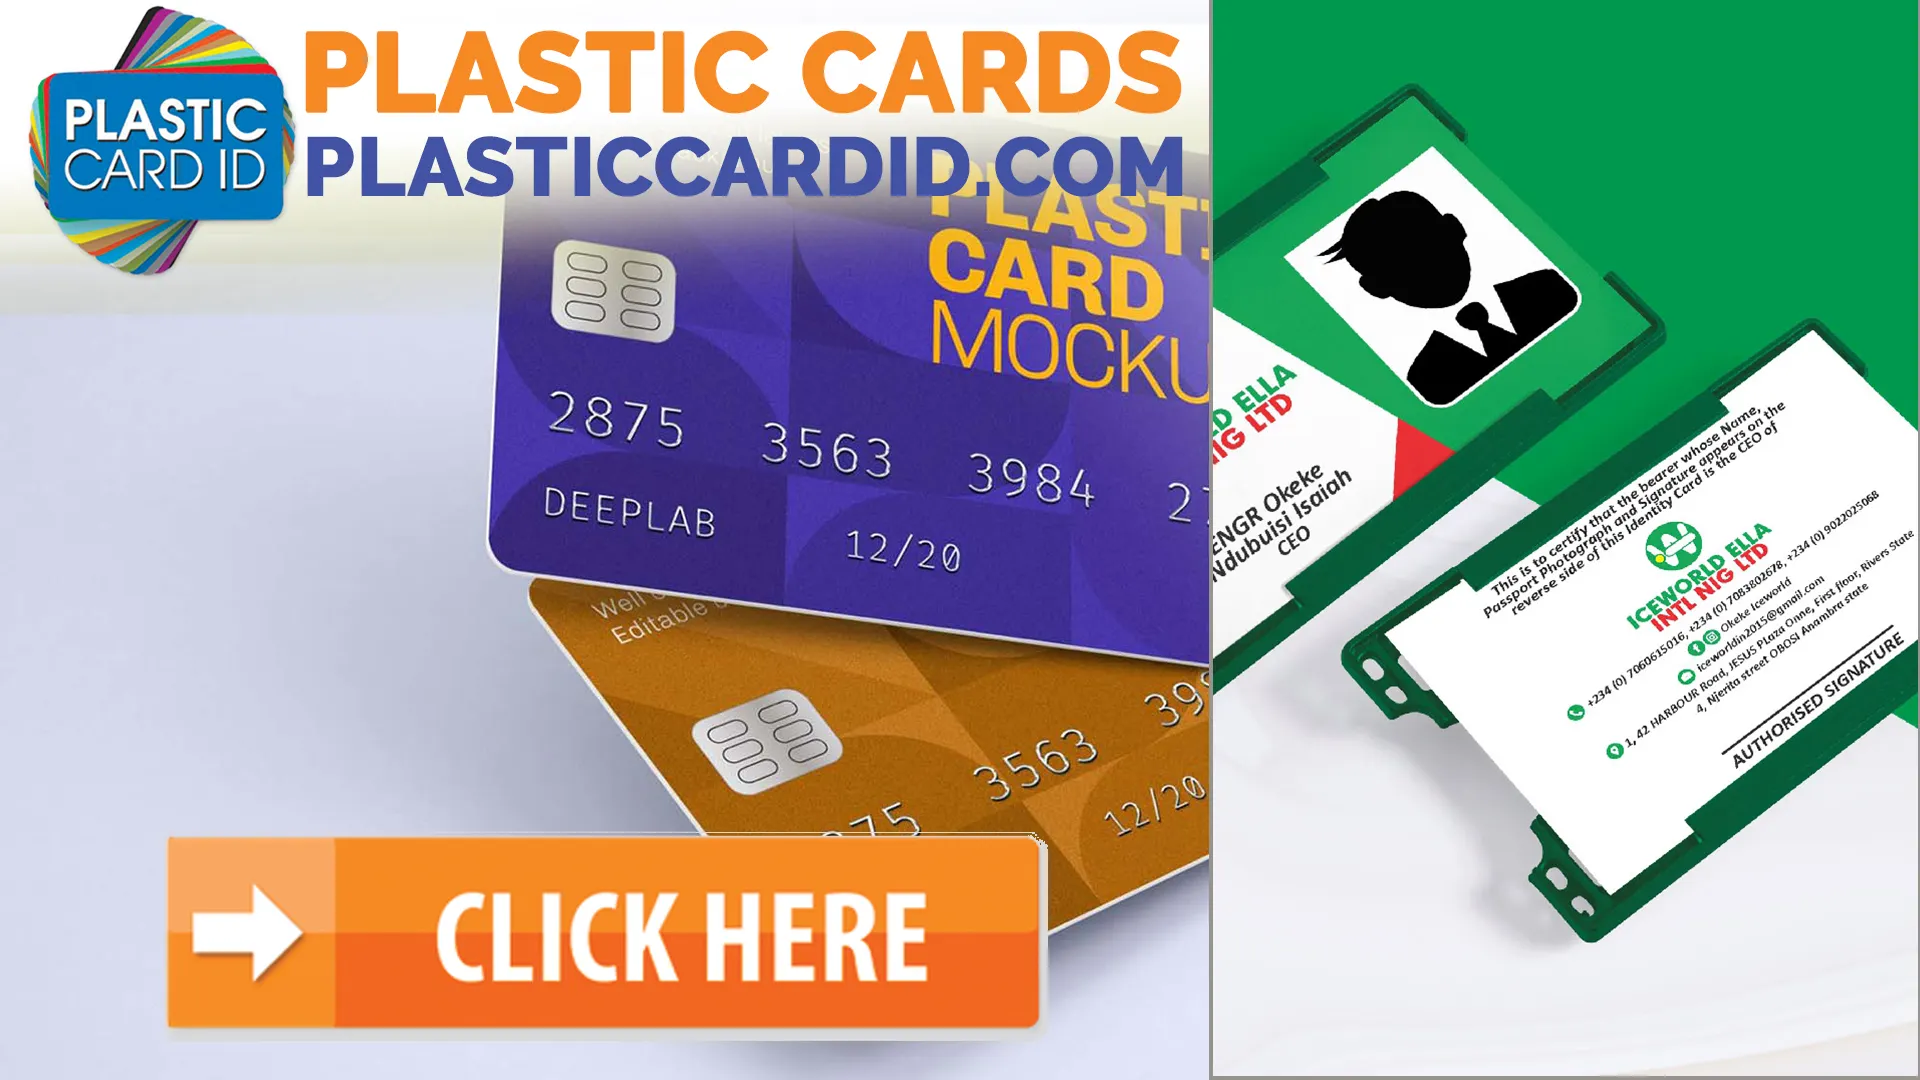 Complement Your Plastic Cards with Our Quality Card Printers